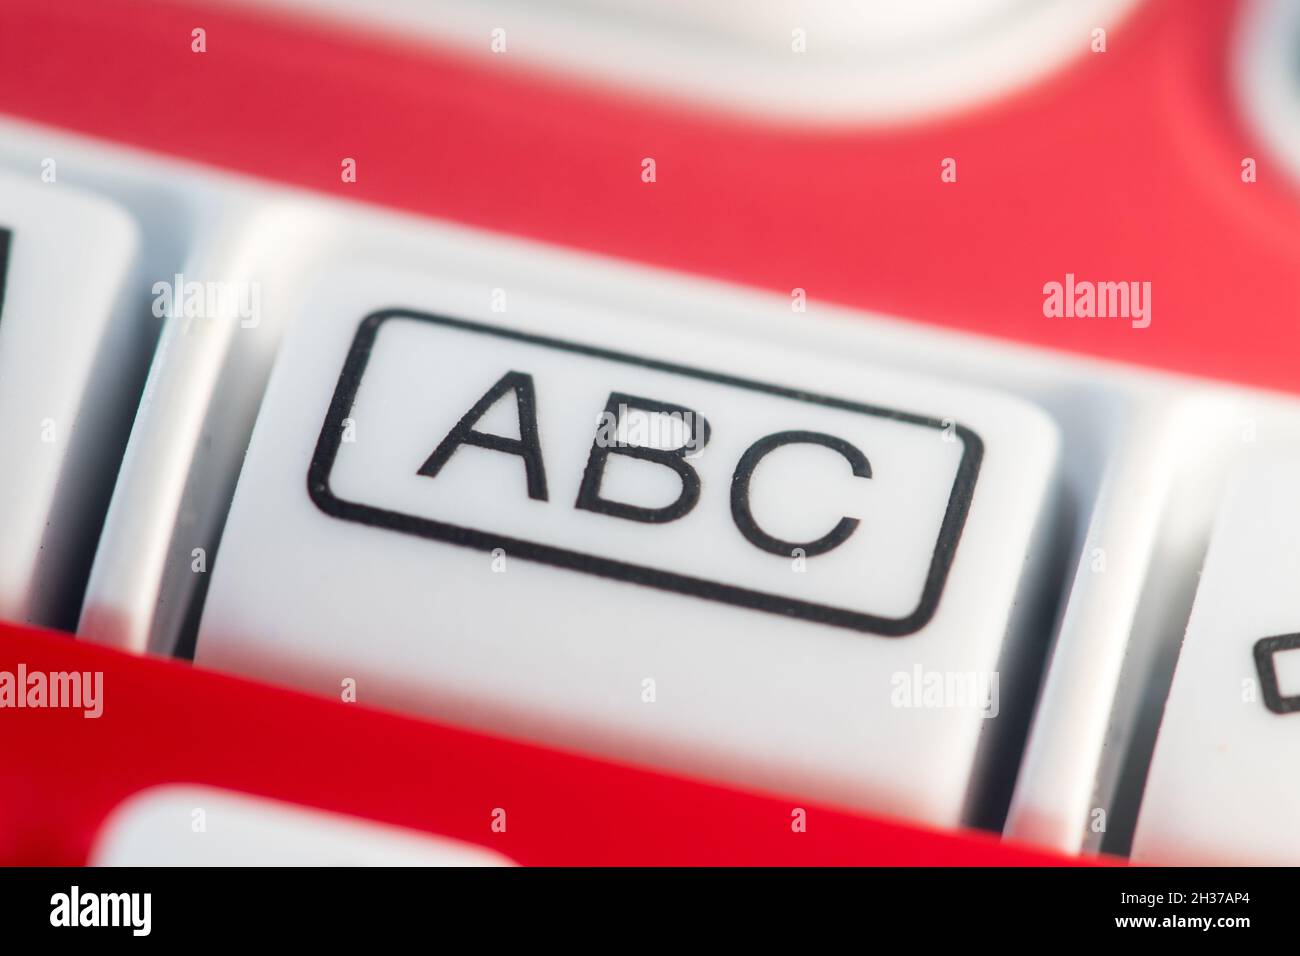 ABC letters on a button of an electronic device Stock Photo